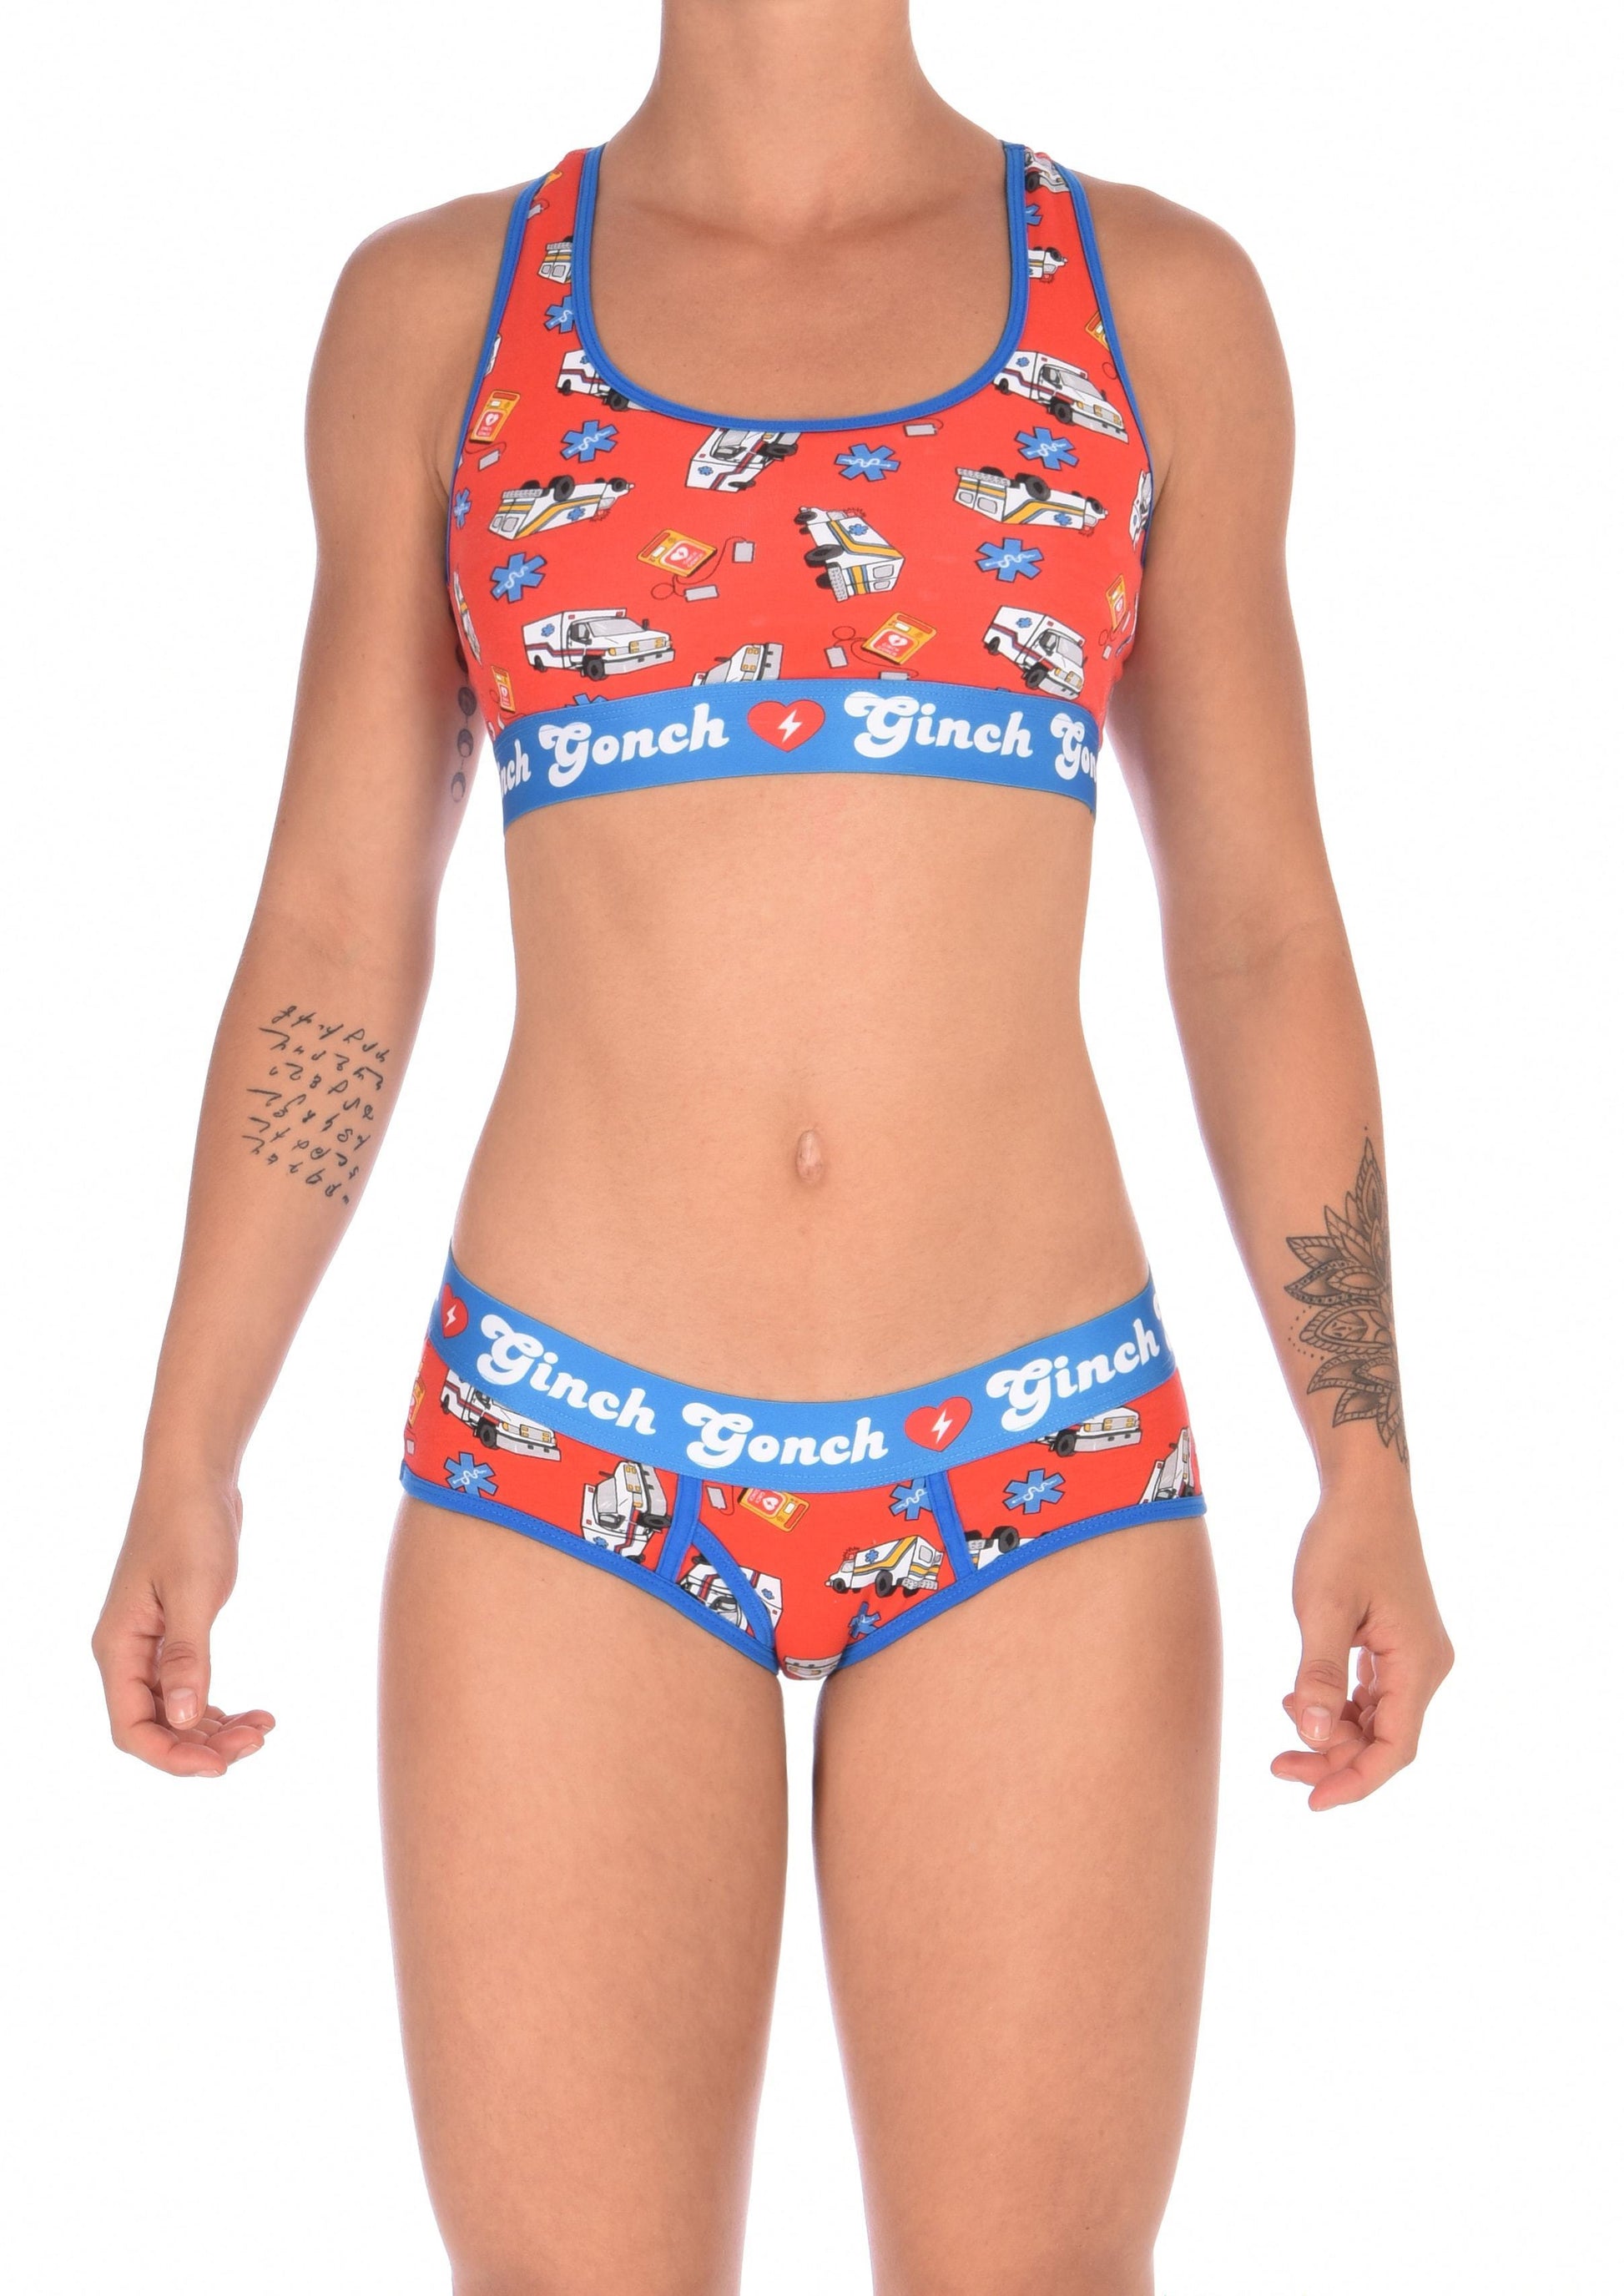 Ginch Gonch GG EMT boy cut Brief women's ambulance print with medical symbol and equipment on red background with blue trim and printed waistband front shown with matching sports bra